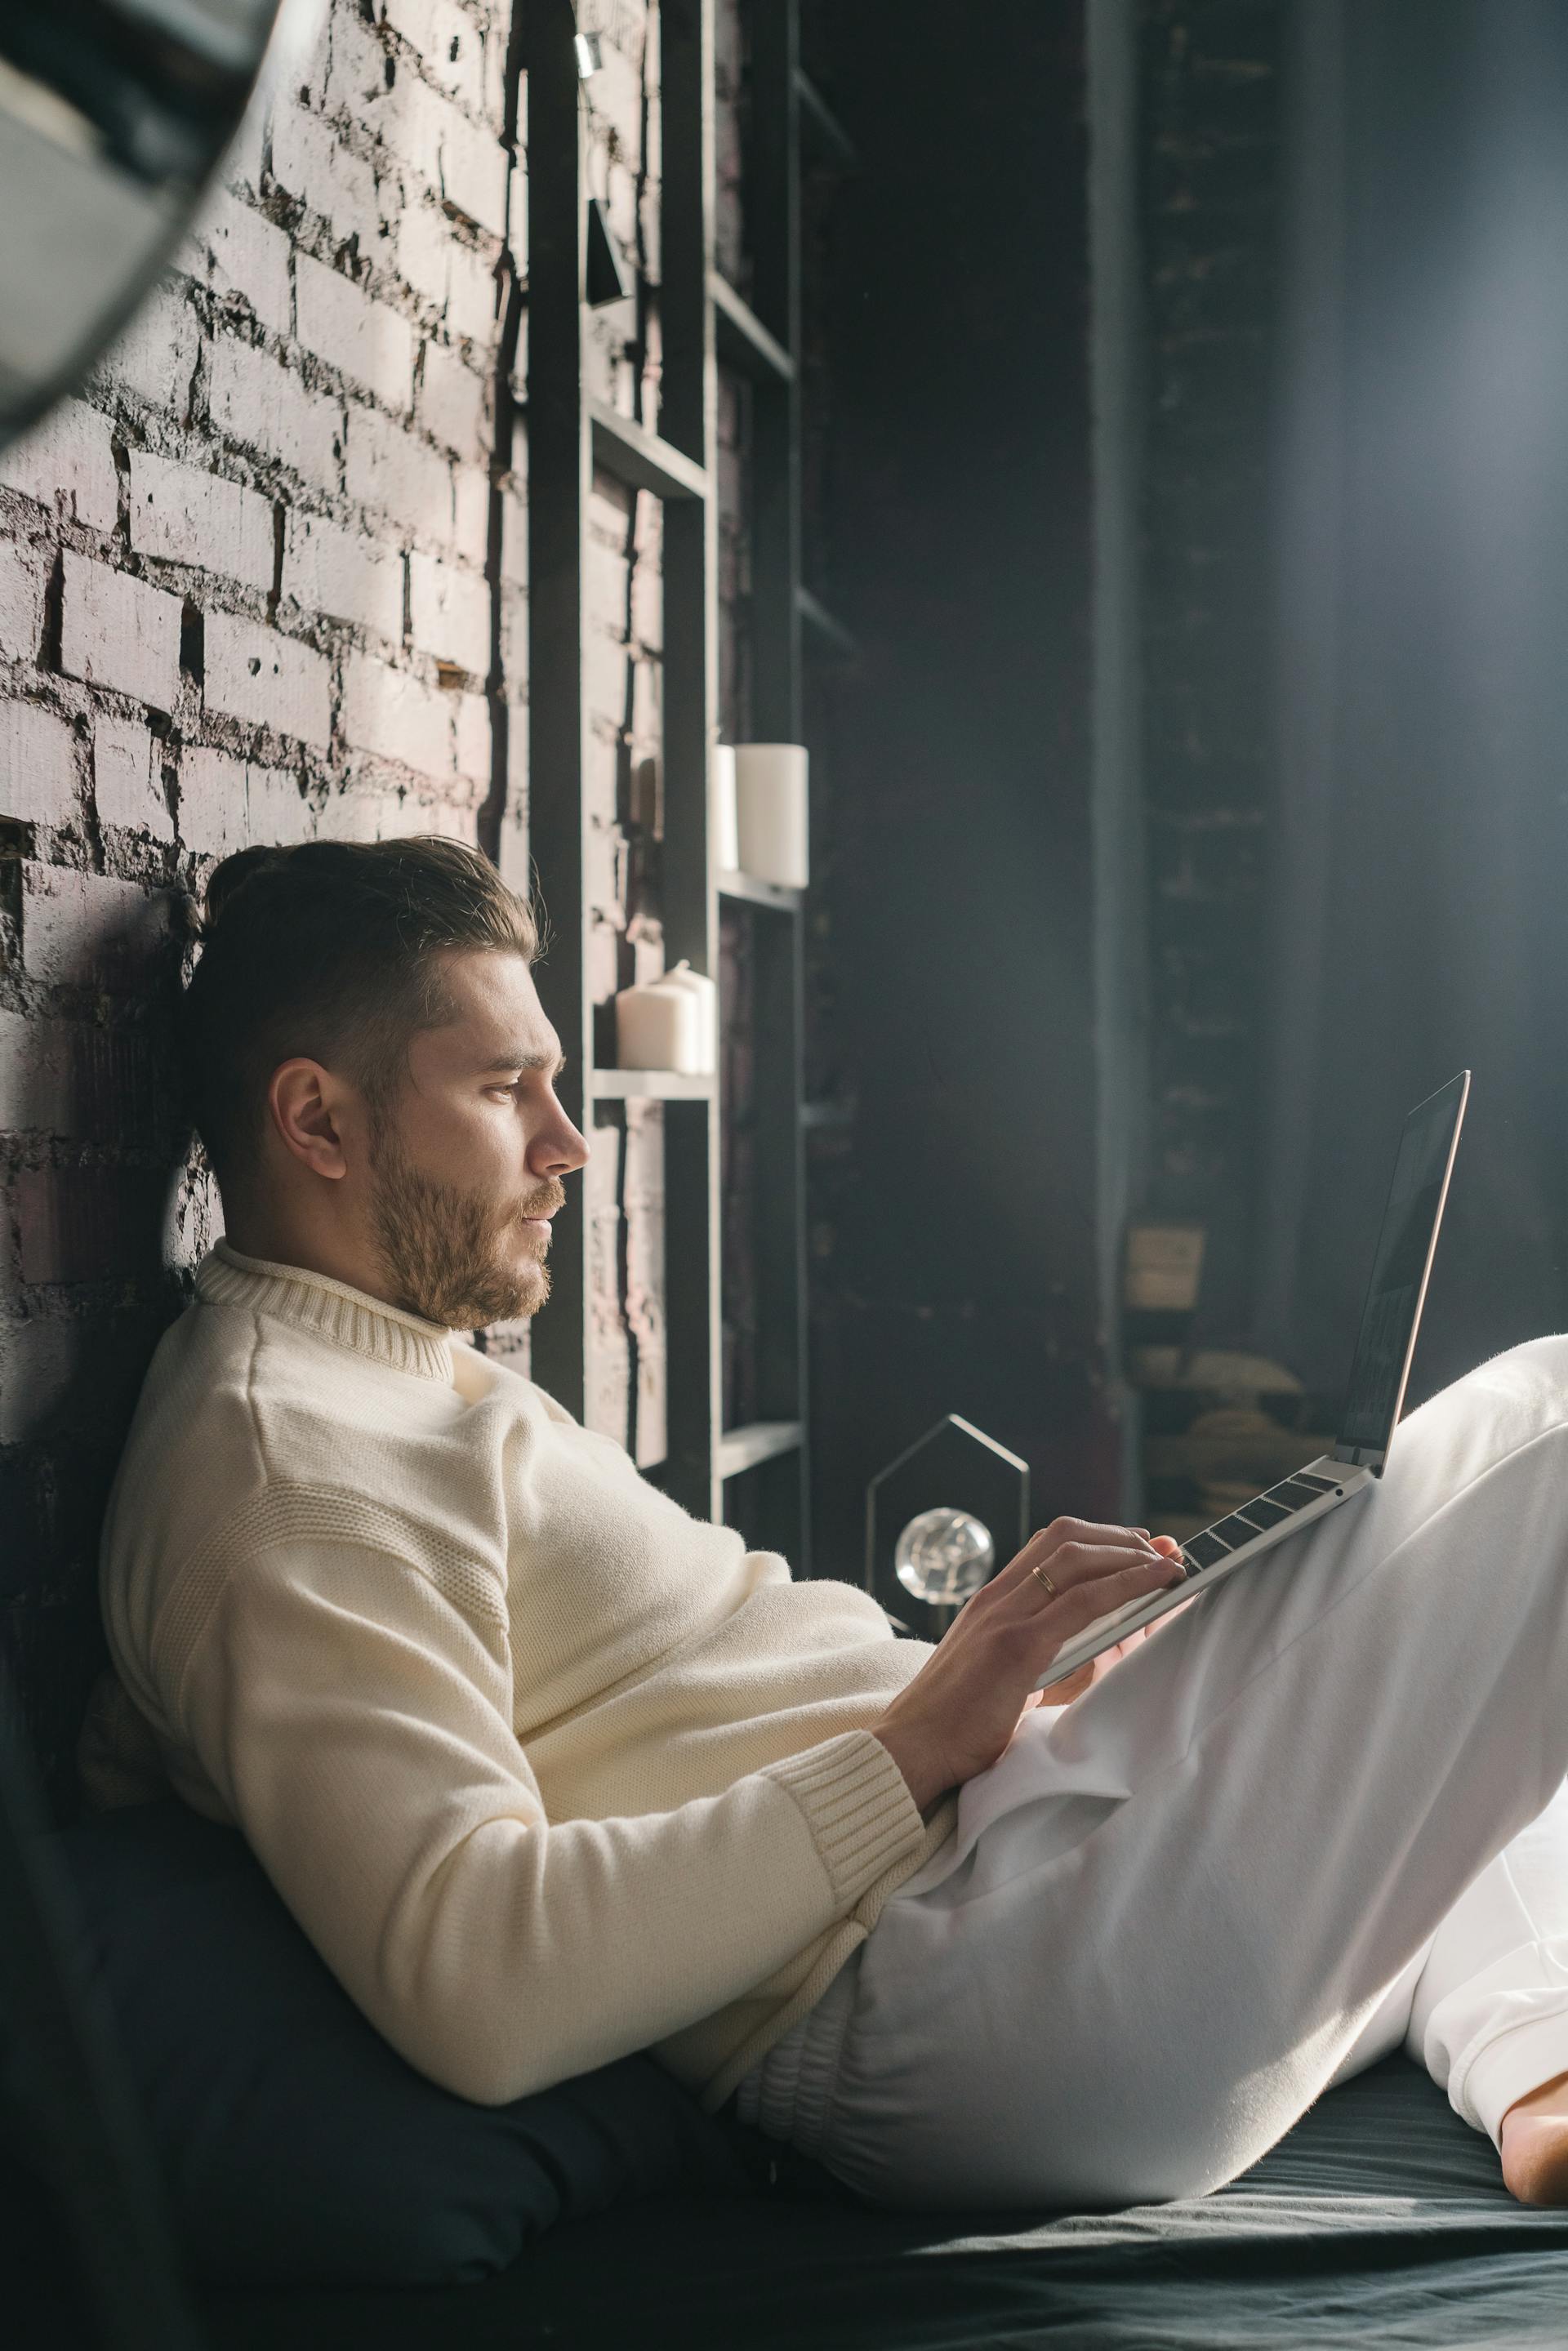 A man sitting on the bed with his laptop | Source: Pexels